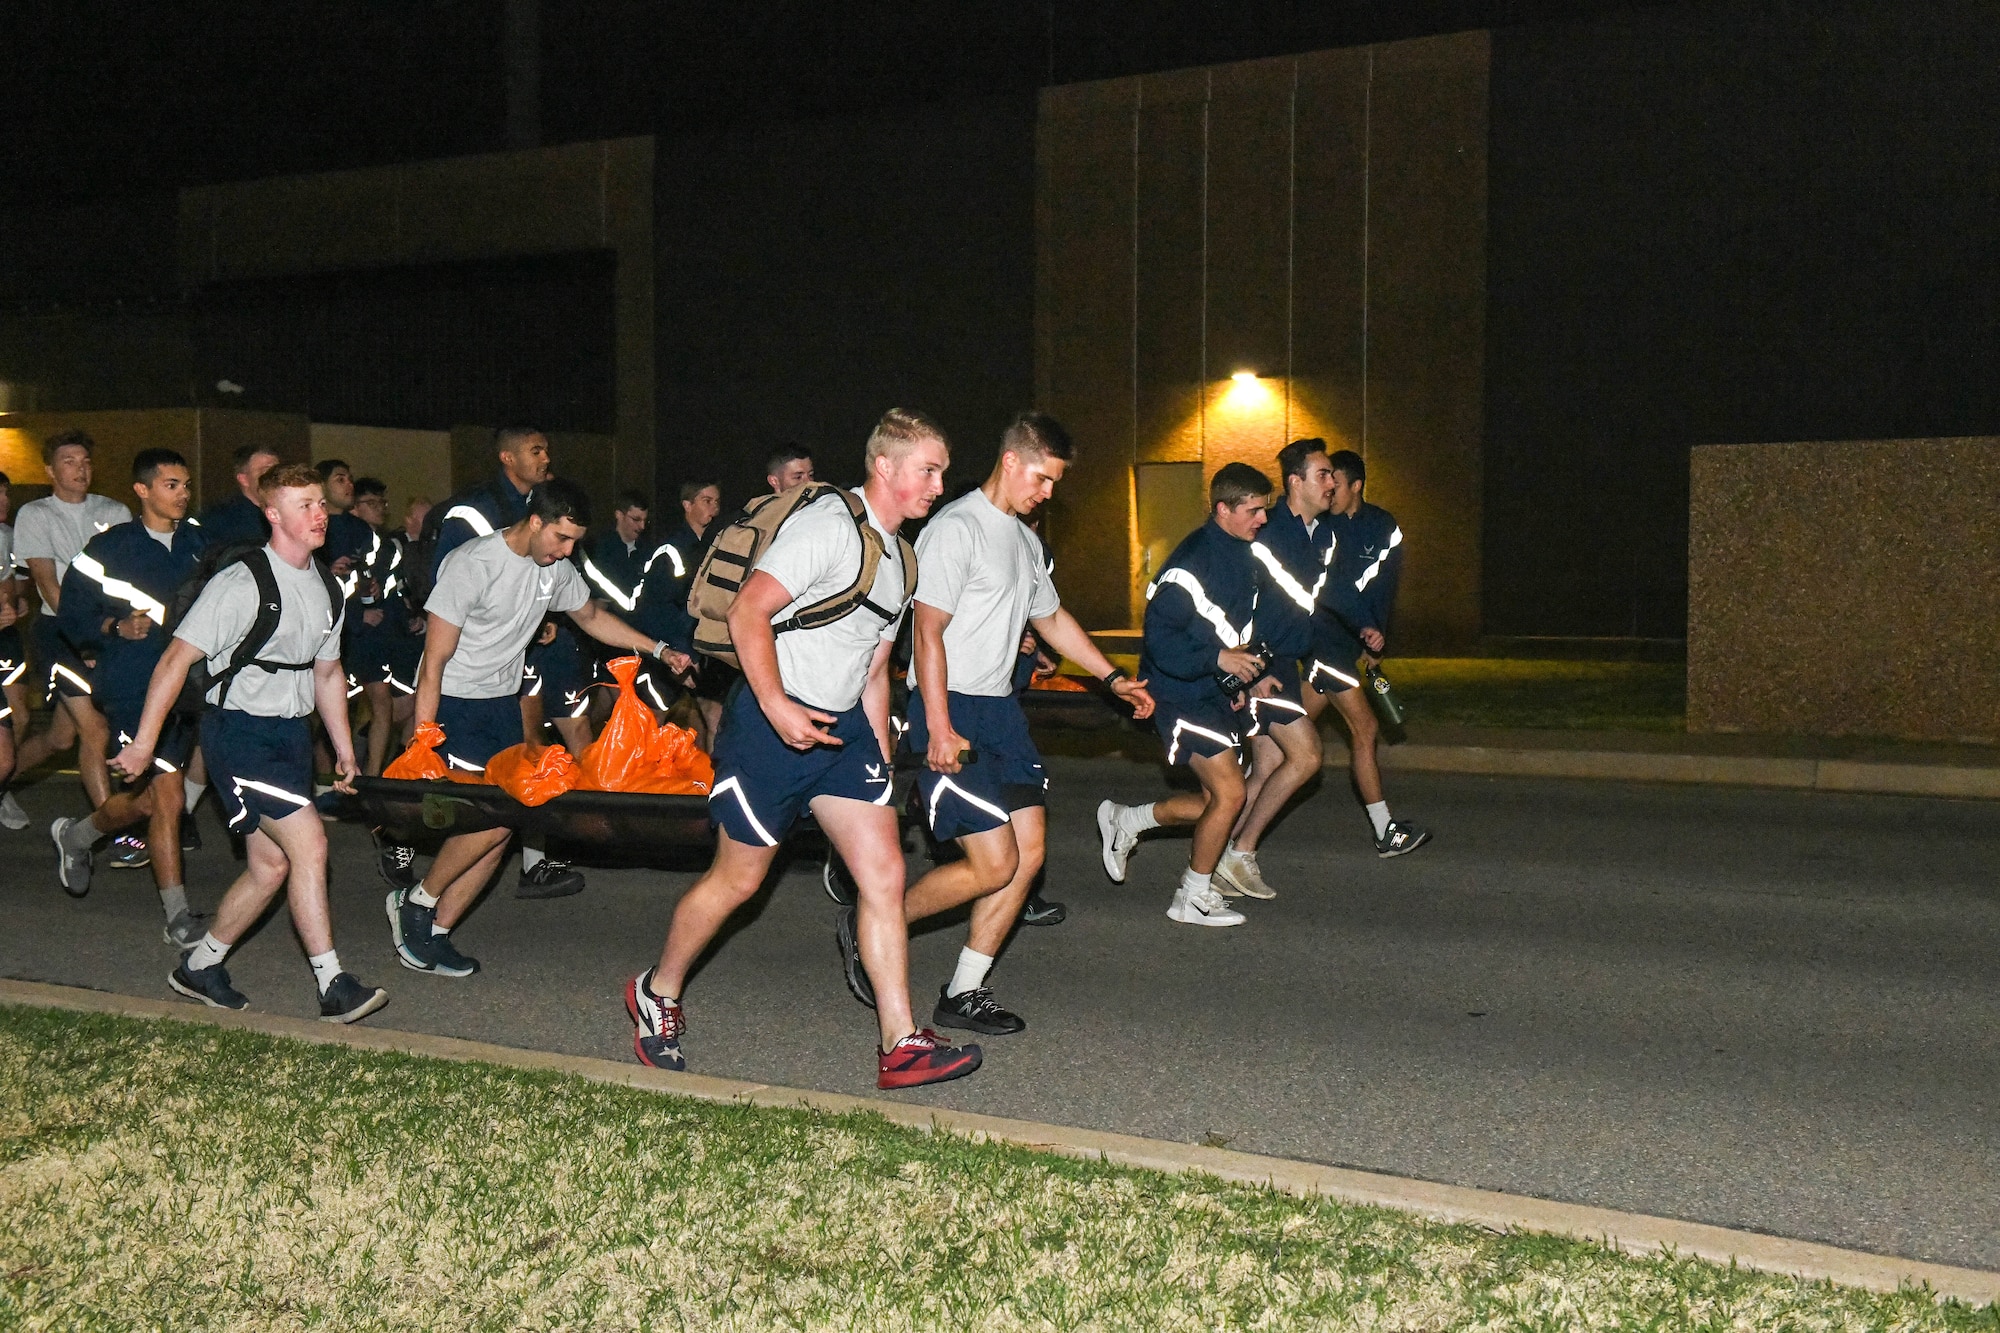 Students from the 97th Training Squadron participate in a 185-pound buddy drag during the Talon Challenge at Altus Air Force Base, Oklahoma, April 10, 2022. Students participated in multiple physical challenges and lectures throughout the day. (U.S. Air Force photo by Airman 1st Class Trenton Jancze)